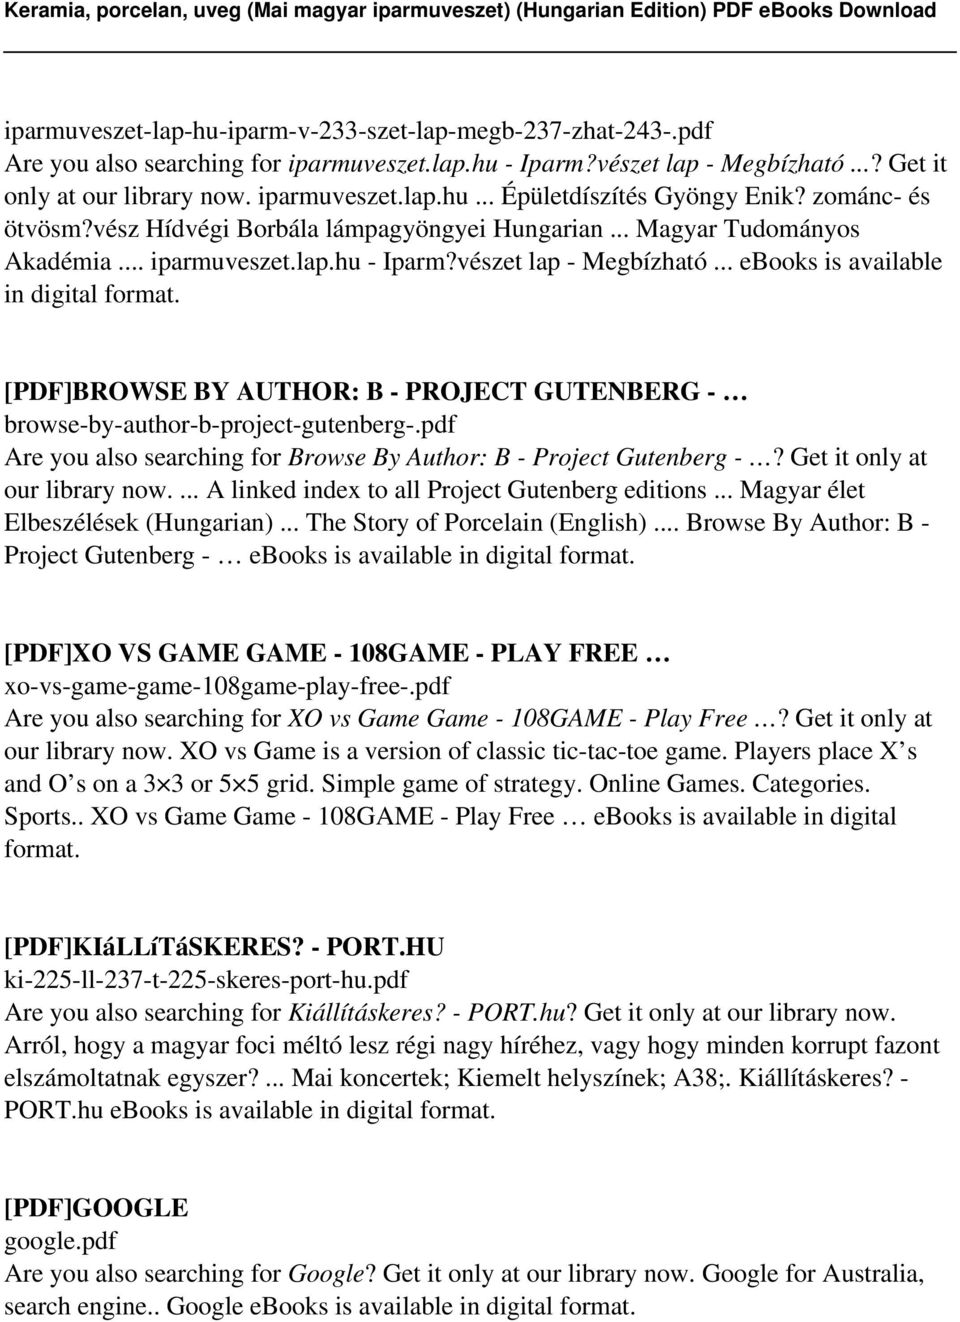 [PDF]BROWSE BY AUTHOR: B - PROJECT GUTENBERG - browse-by-author-b-project-gutenberg-.pdf Are you also searching for Browse By Author: B - Project Gutenberg -? Get it only at our library now.